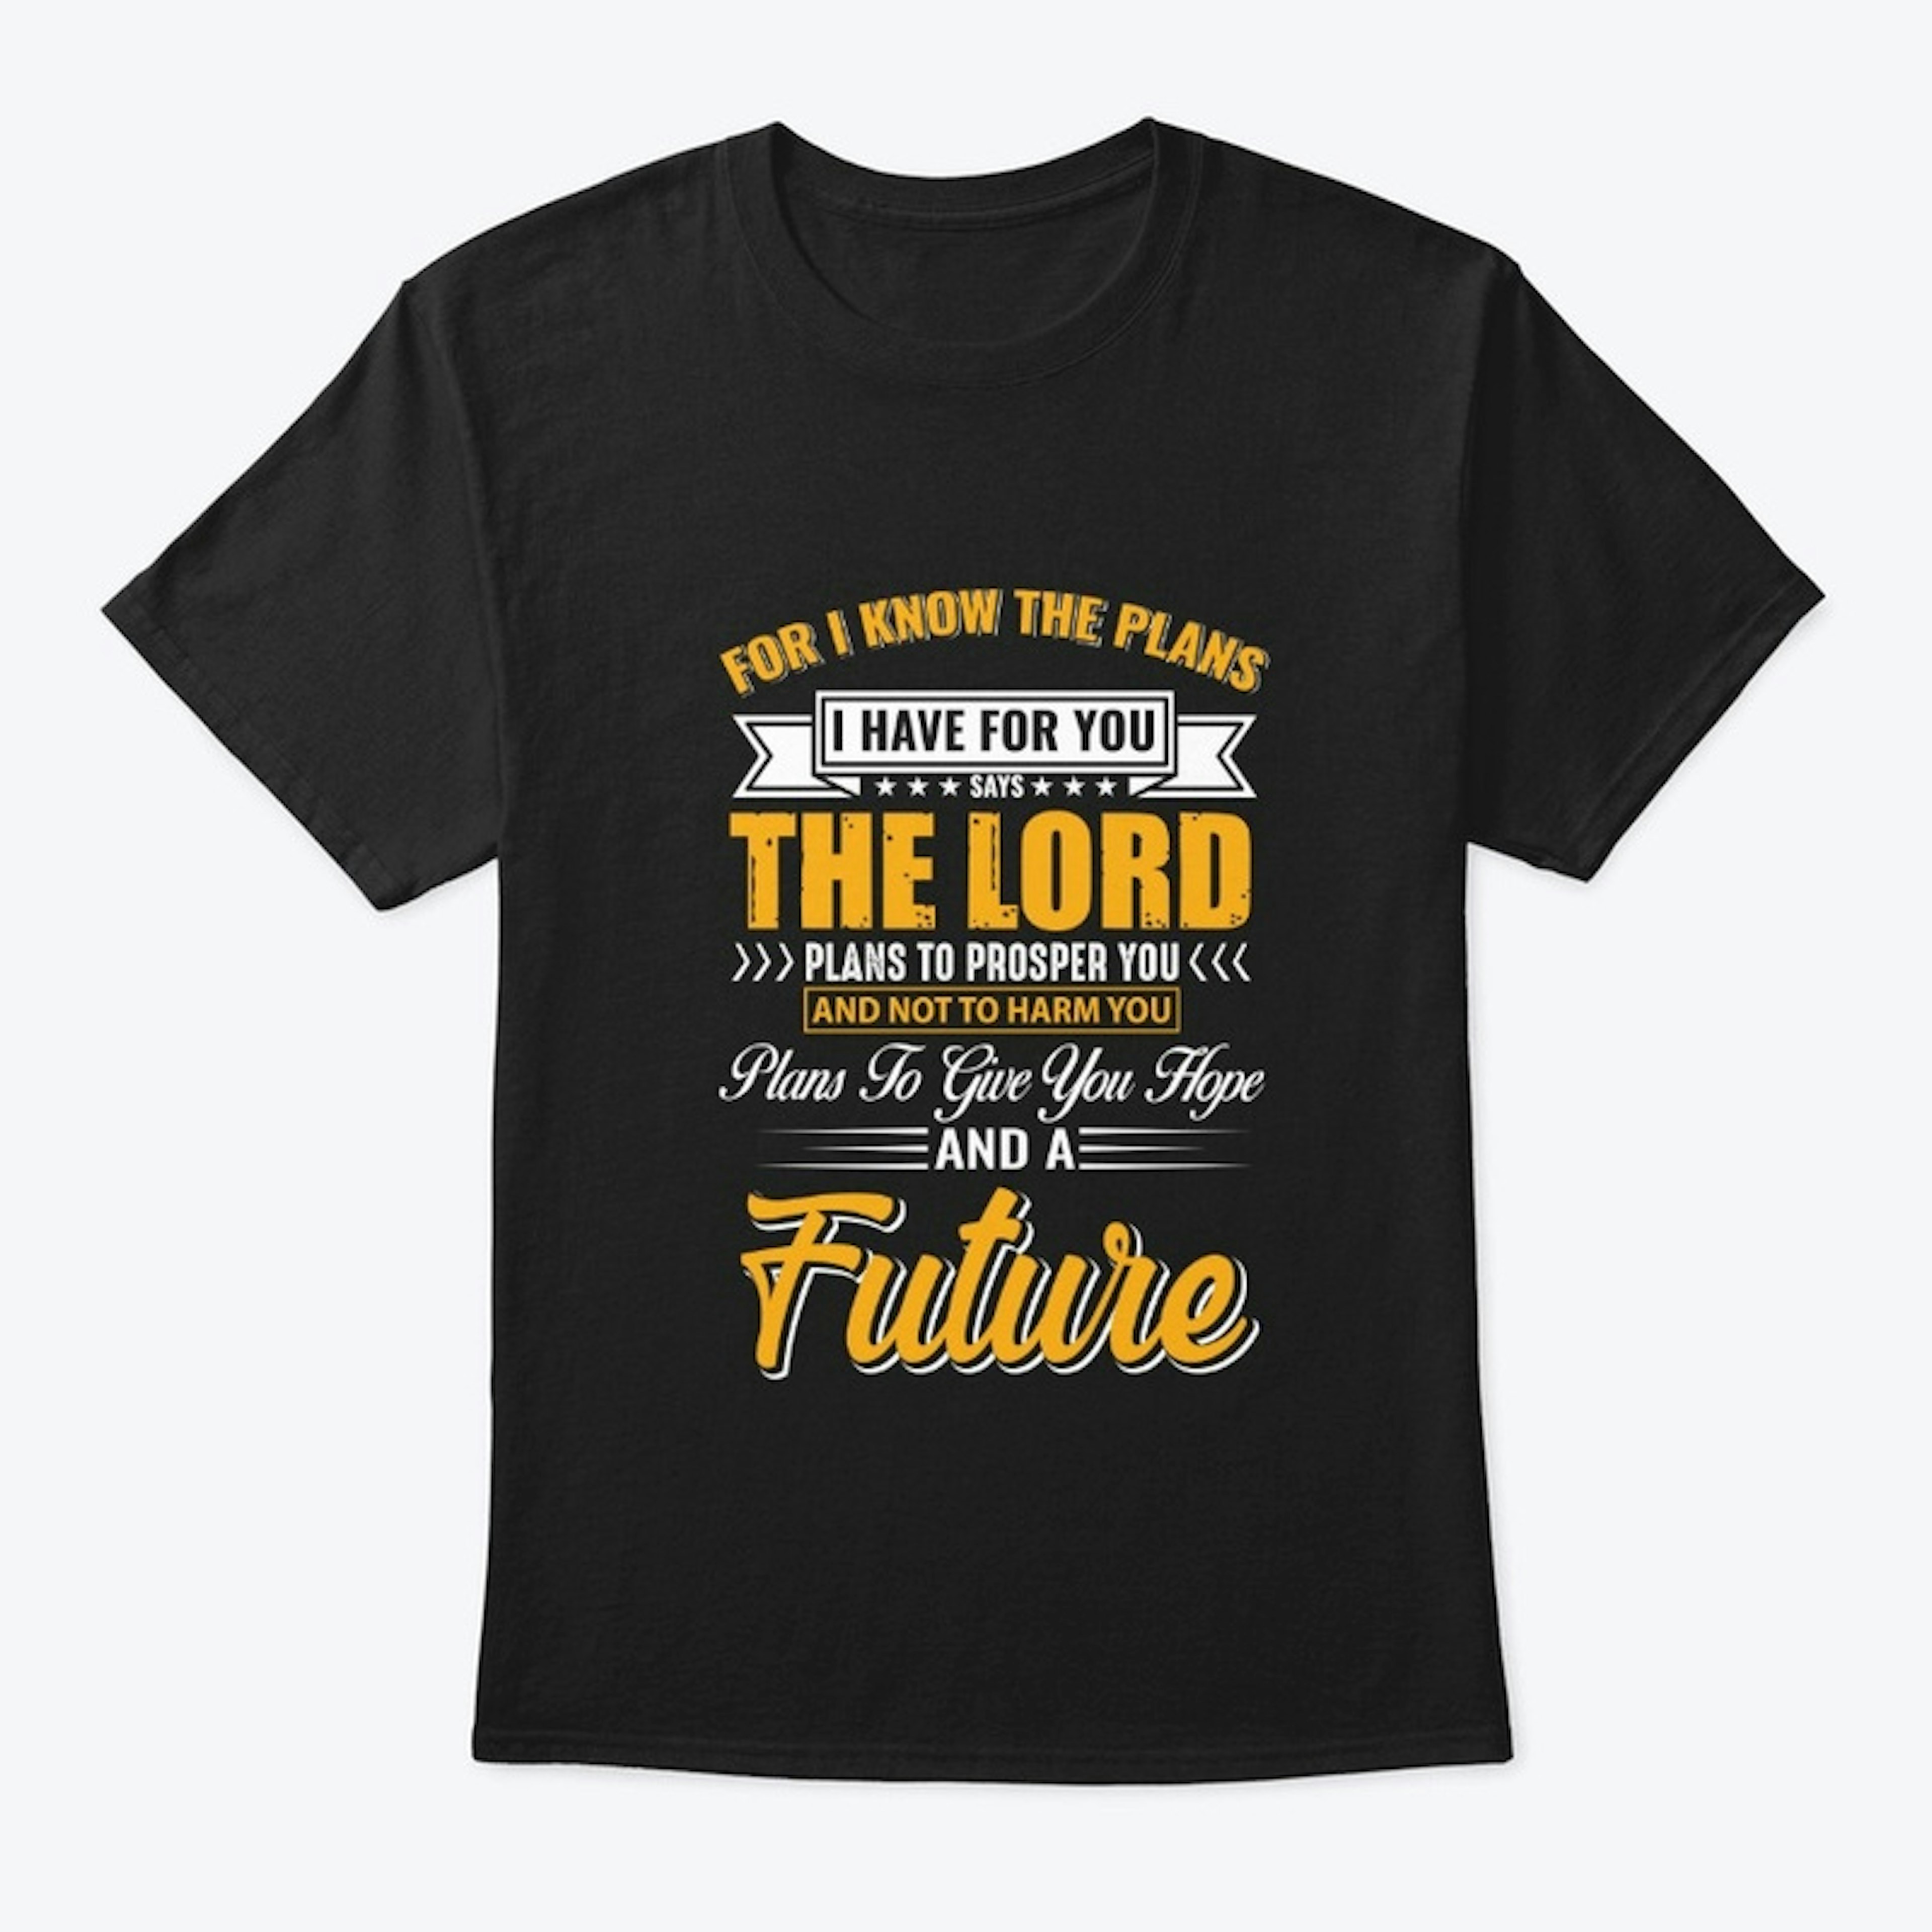 Christian tees about our future